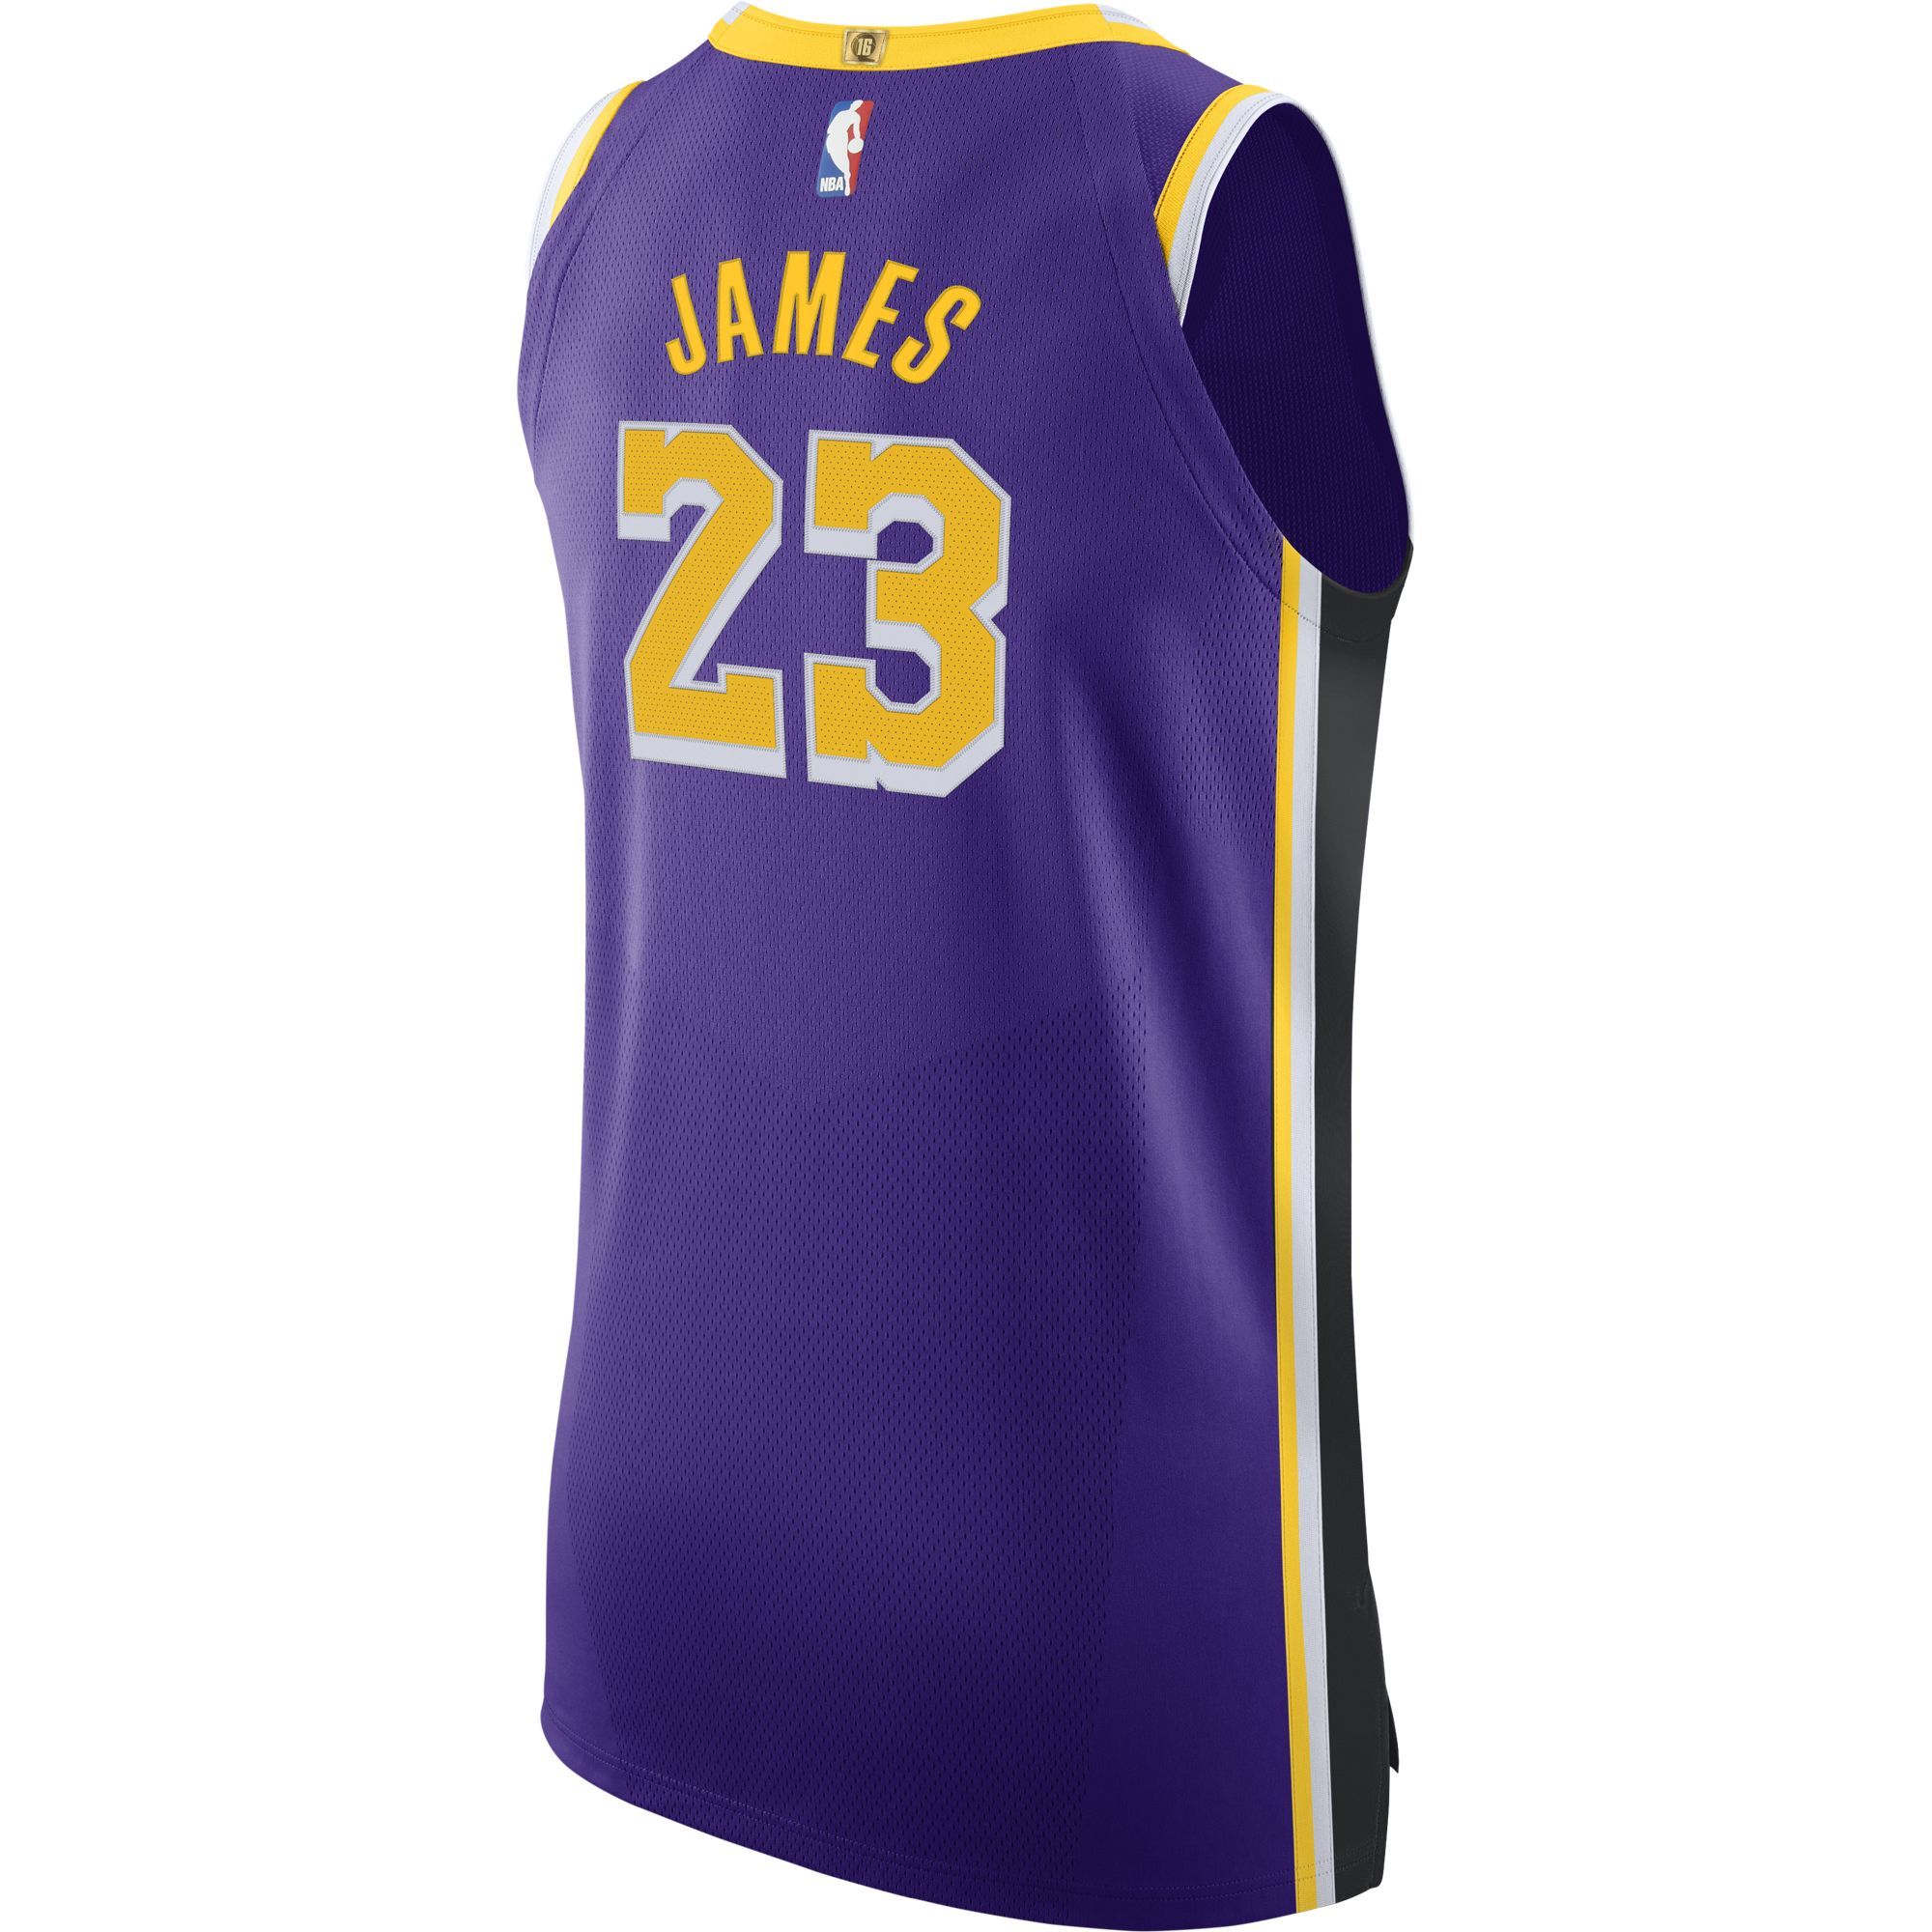 lakers statement jersey 2019